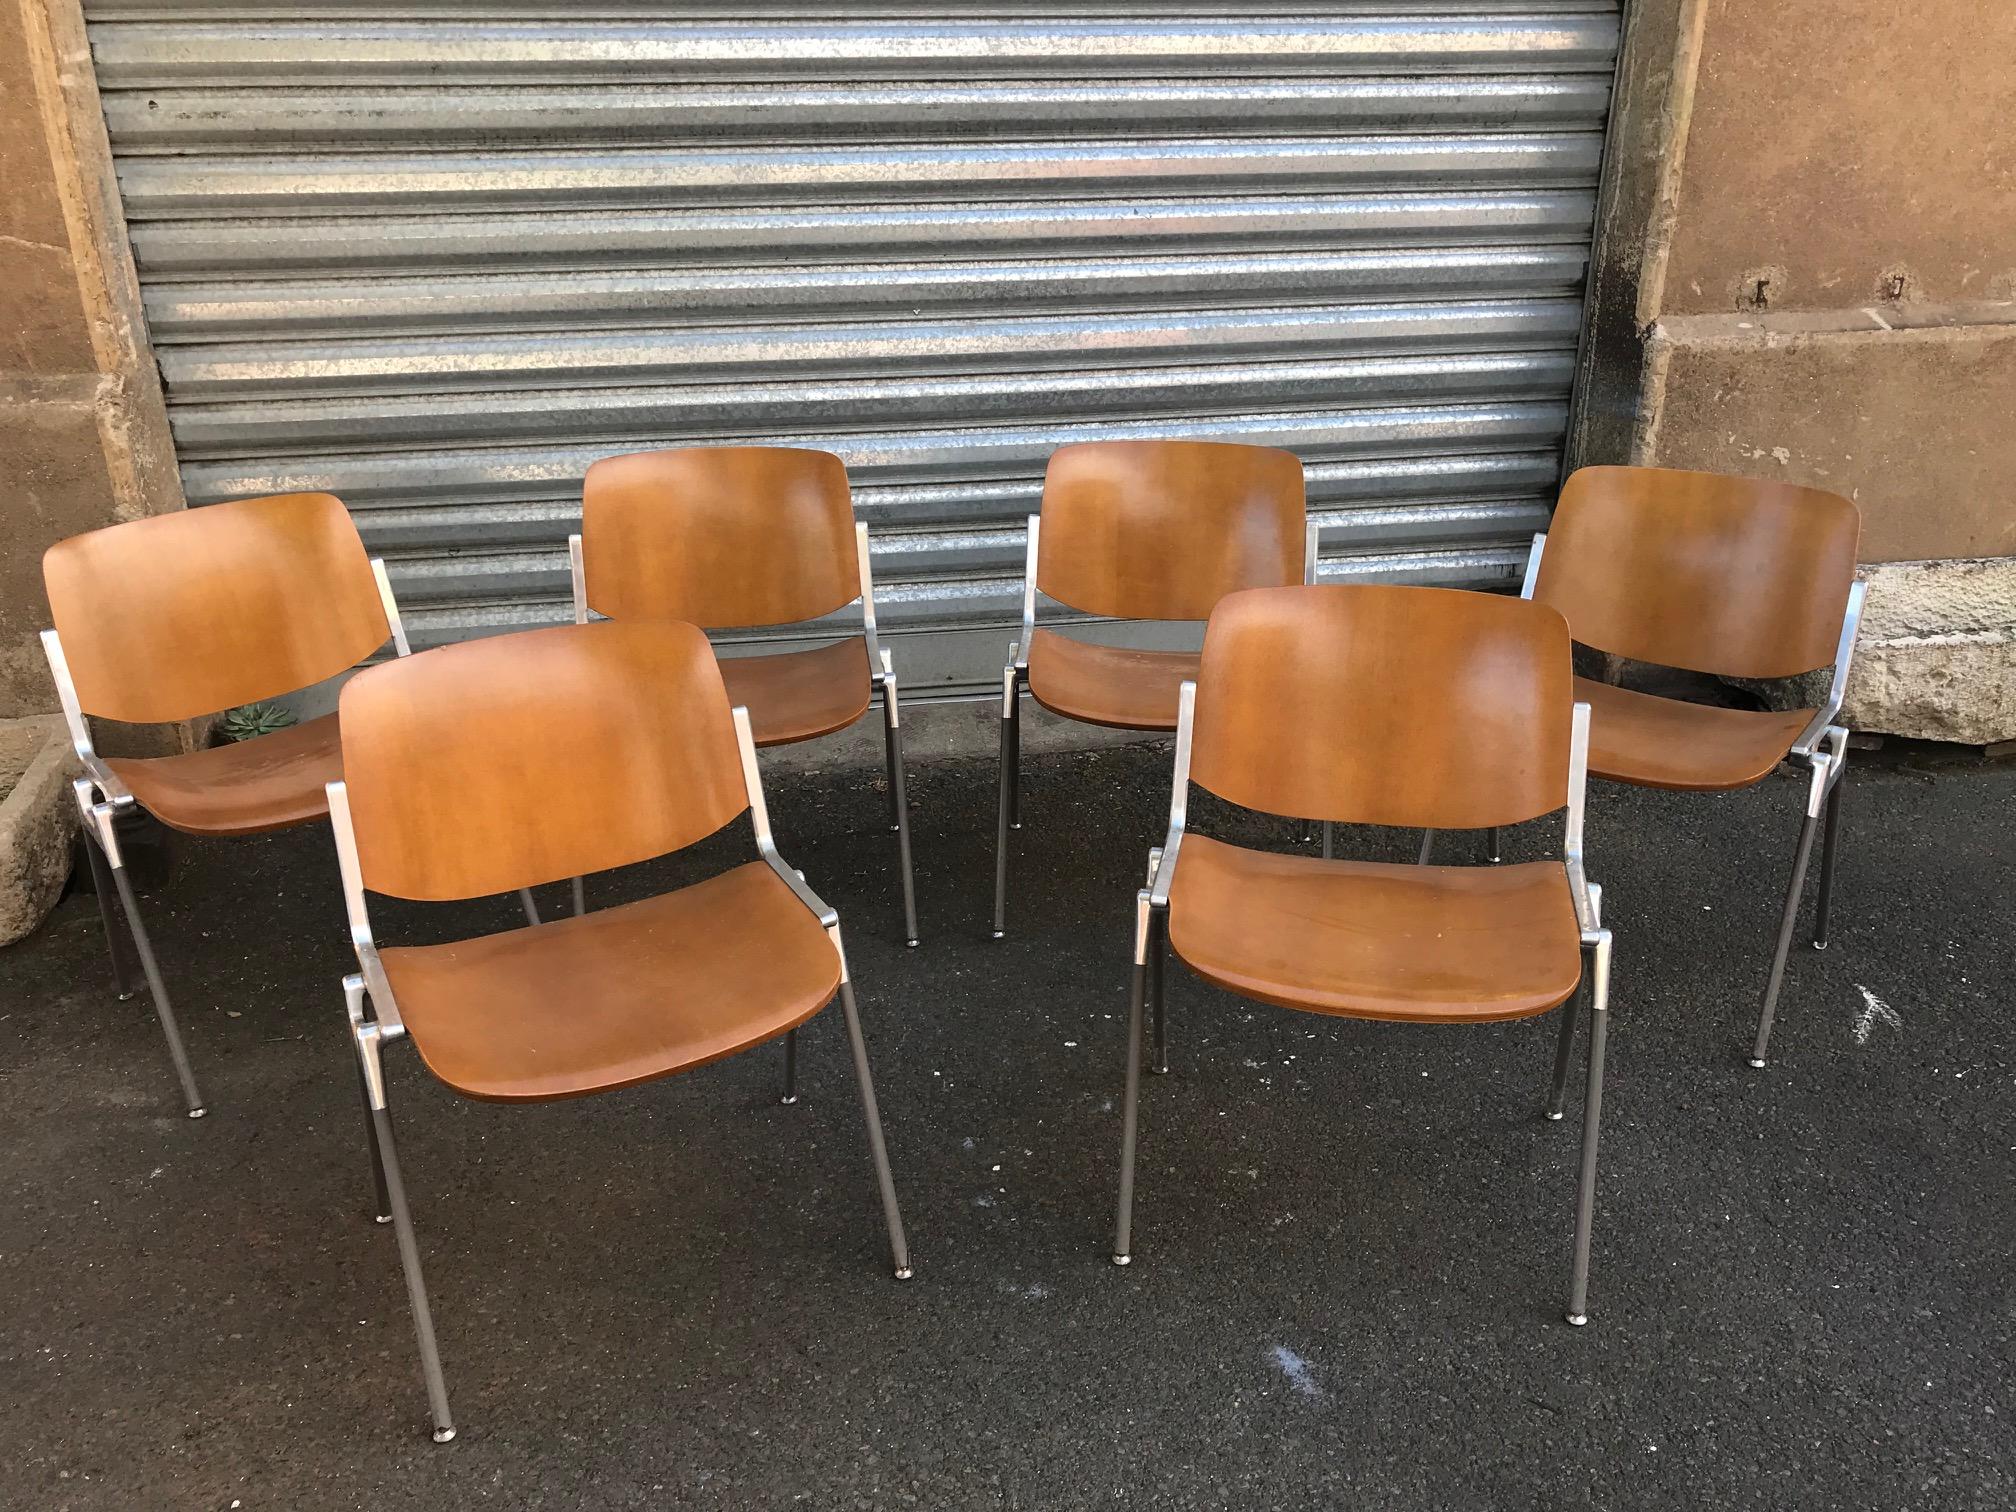 Set of six Mid-Century Modern Giancarlo Piretti DSC conference chairs by Castelli. 
Wooden seat and back and Aluminum base.
These Italian stacking chairs feature carved pressed wood backs and seats stained in a warm tone. 
The sturdy silver tone